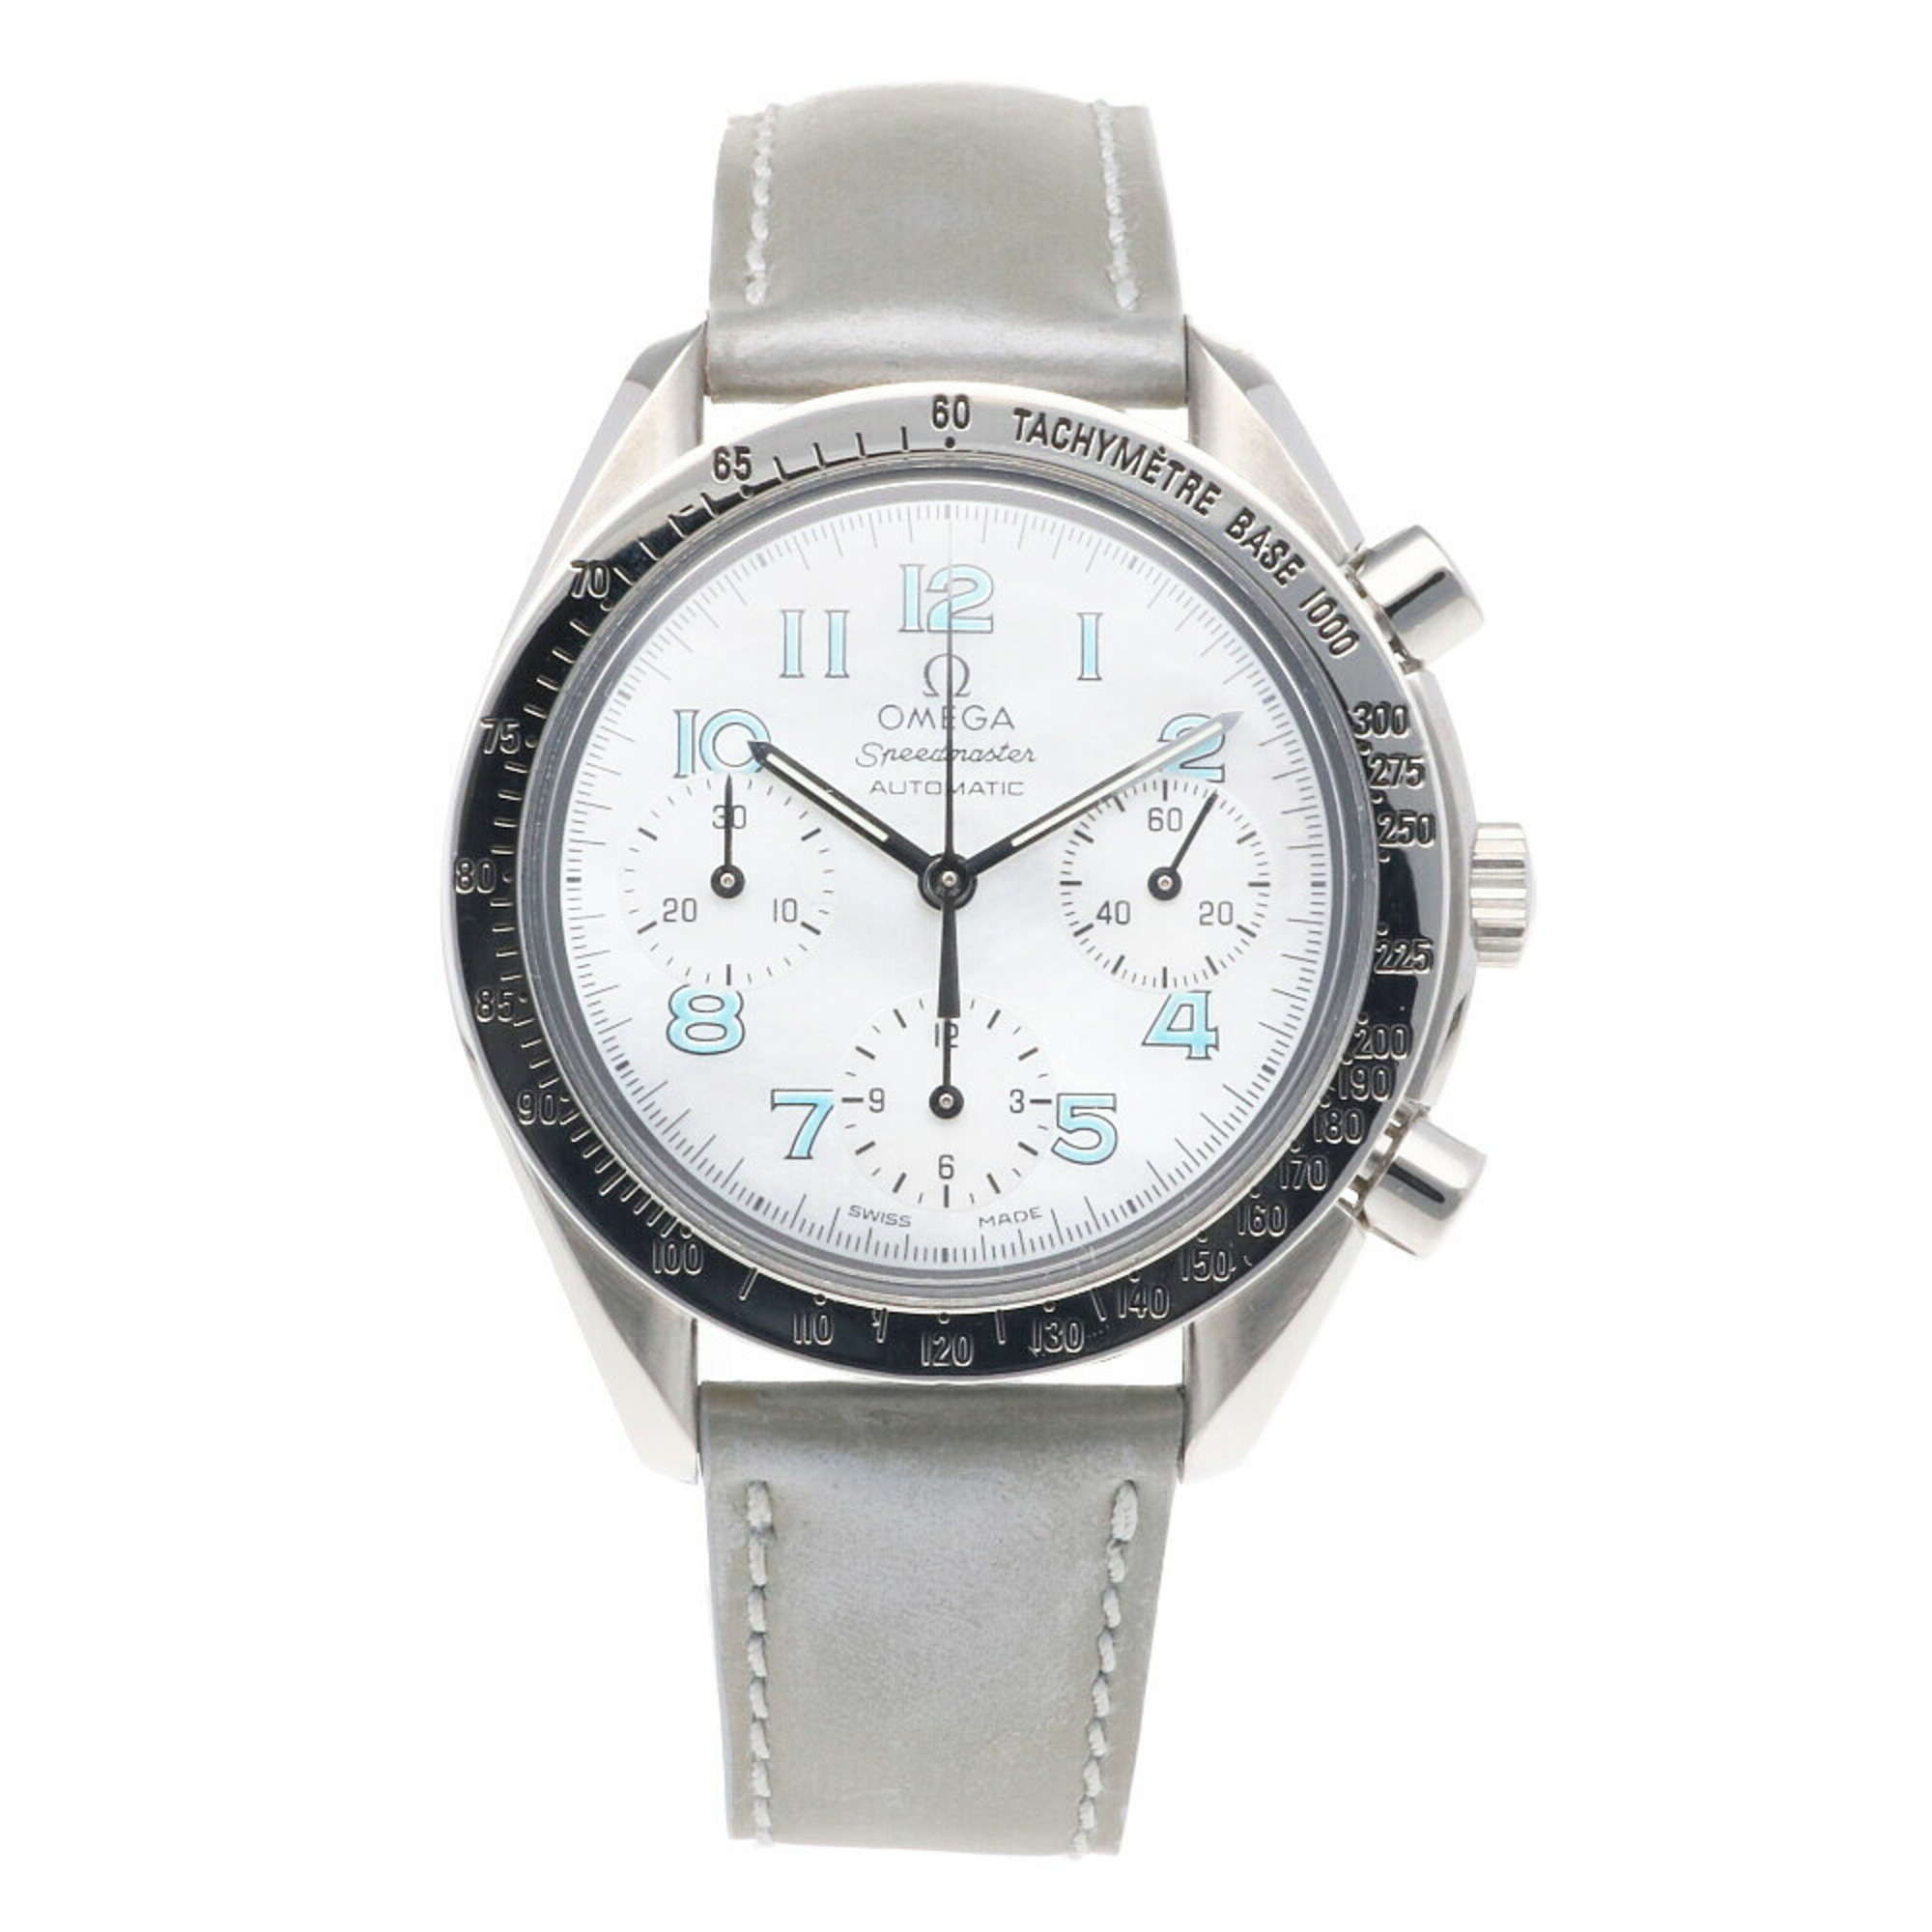 OMEGA Speedmaster Watch Stainless Steel 38027153 Automatic Women's White Shell